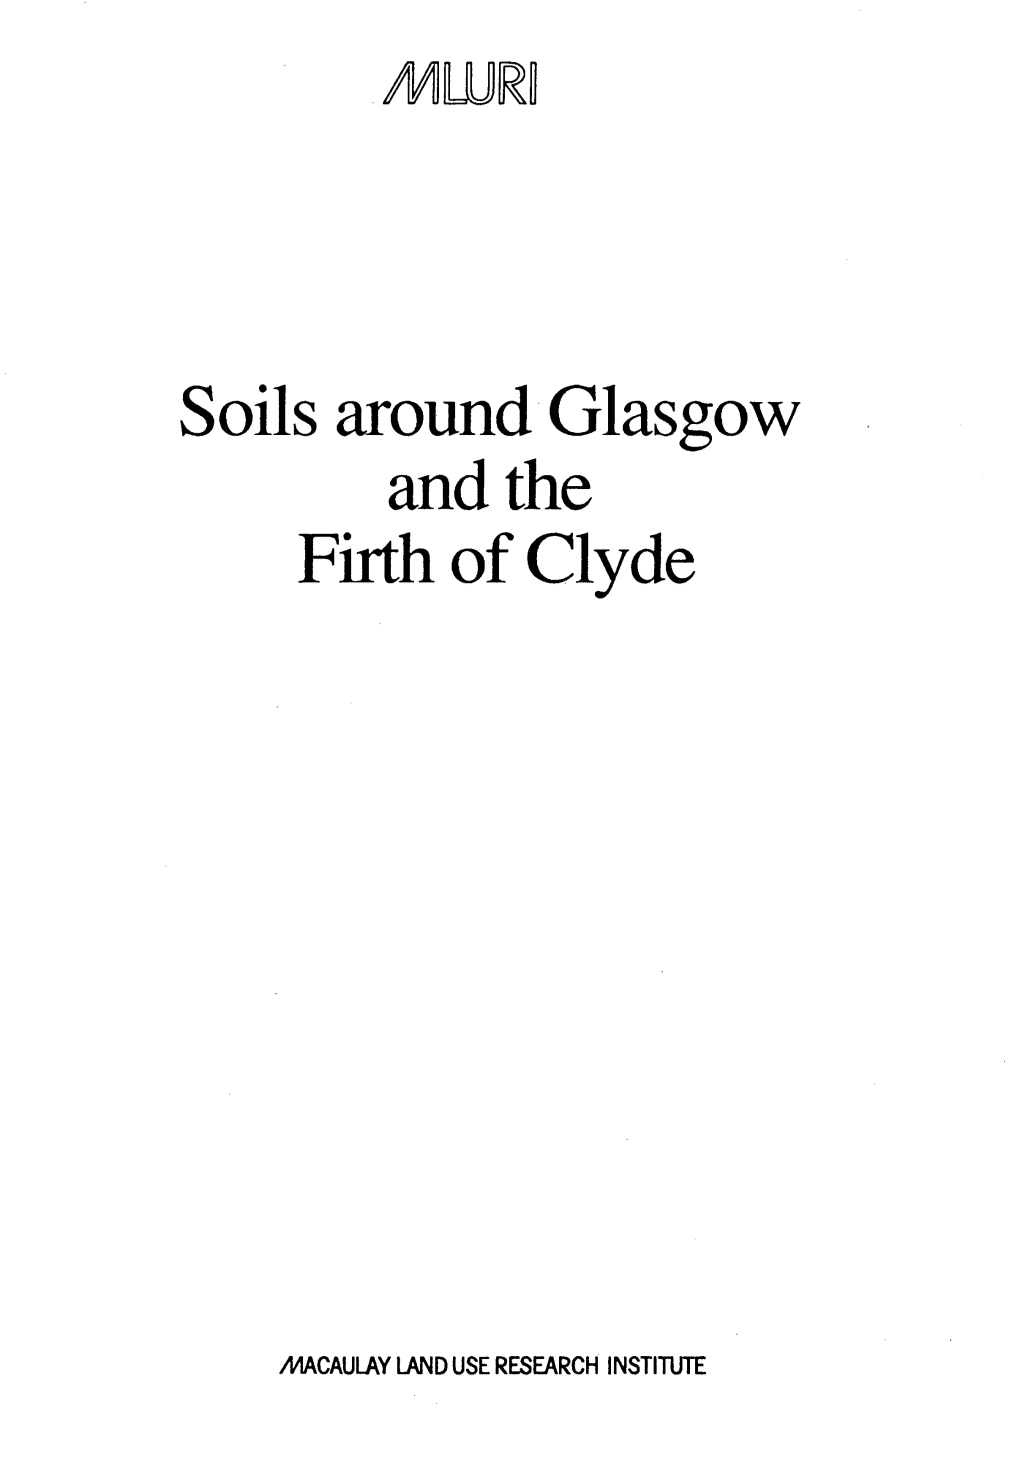 The Soils Around Glasgow and the Firth of Clyde